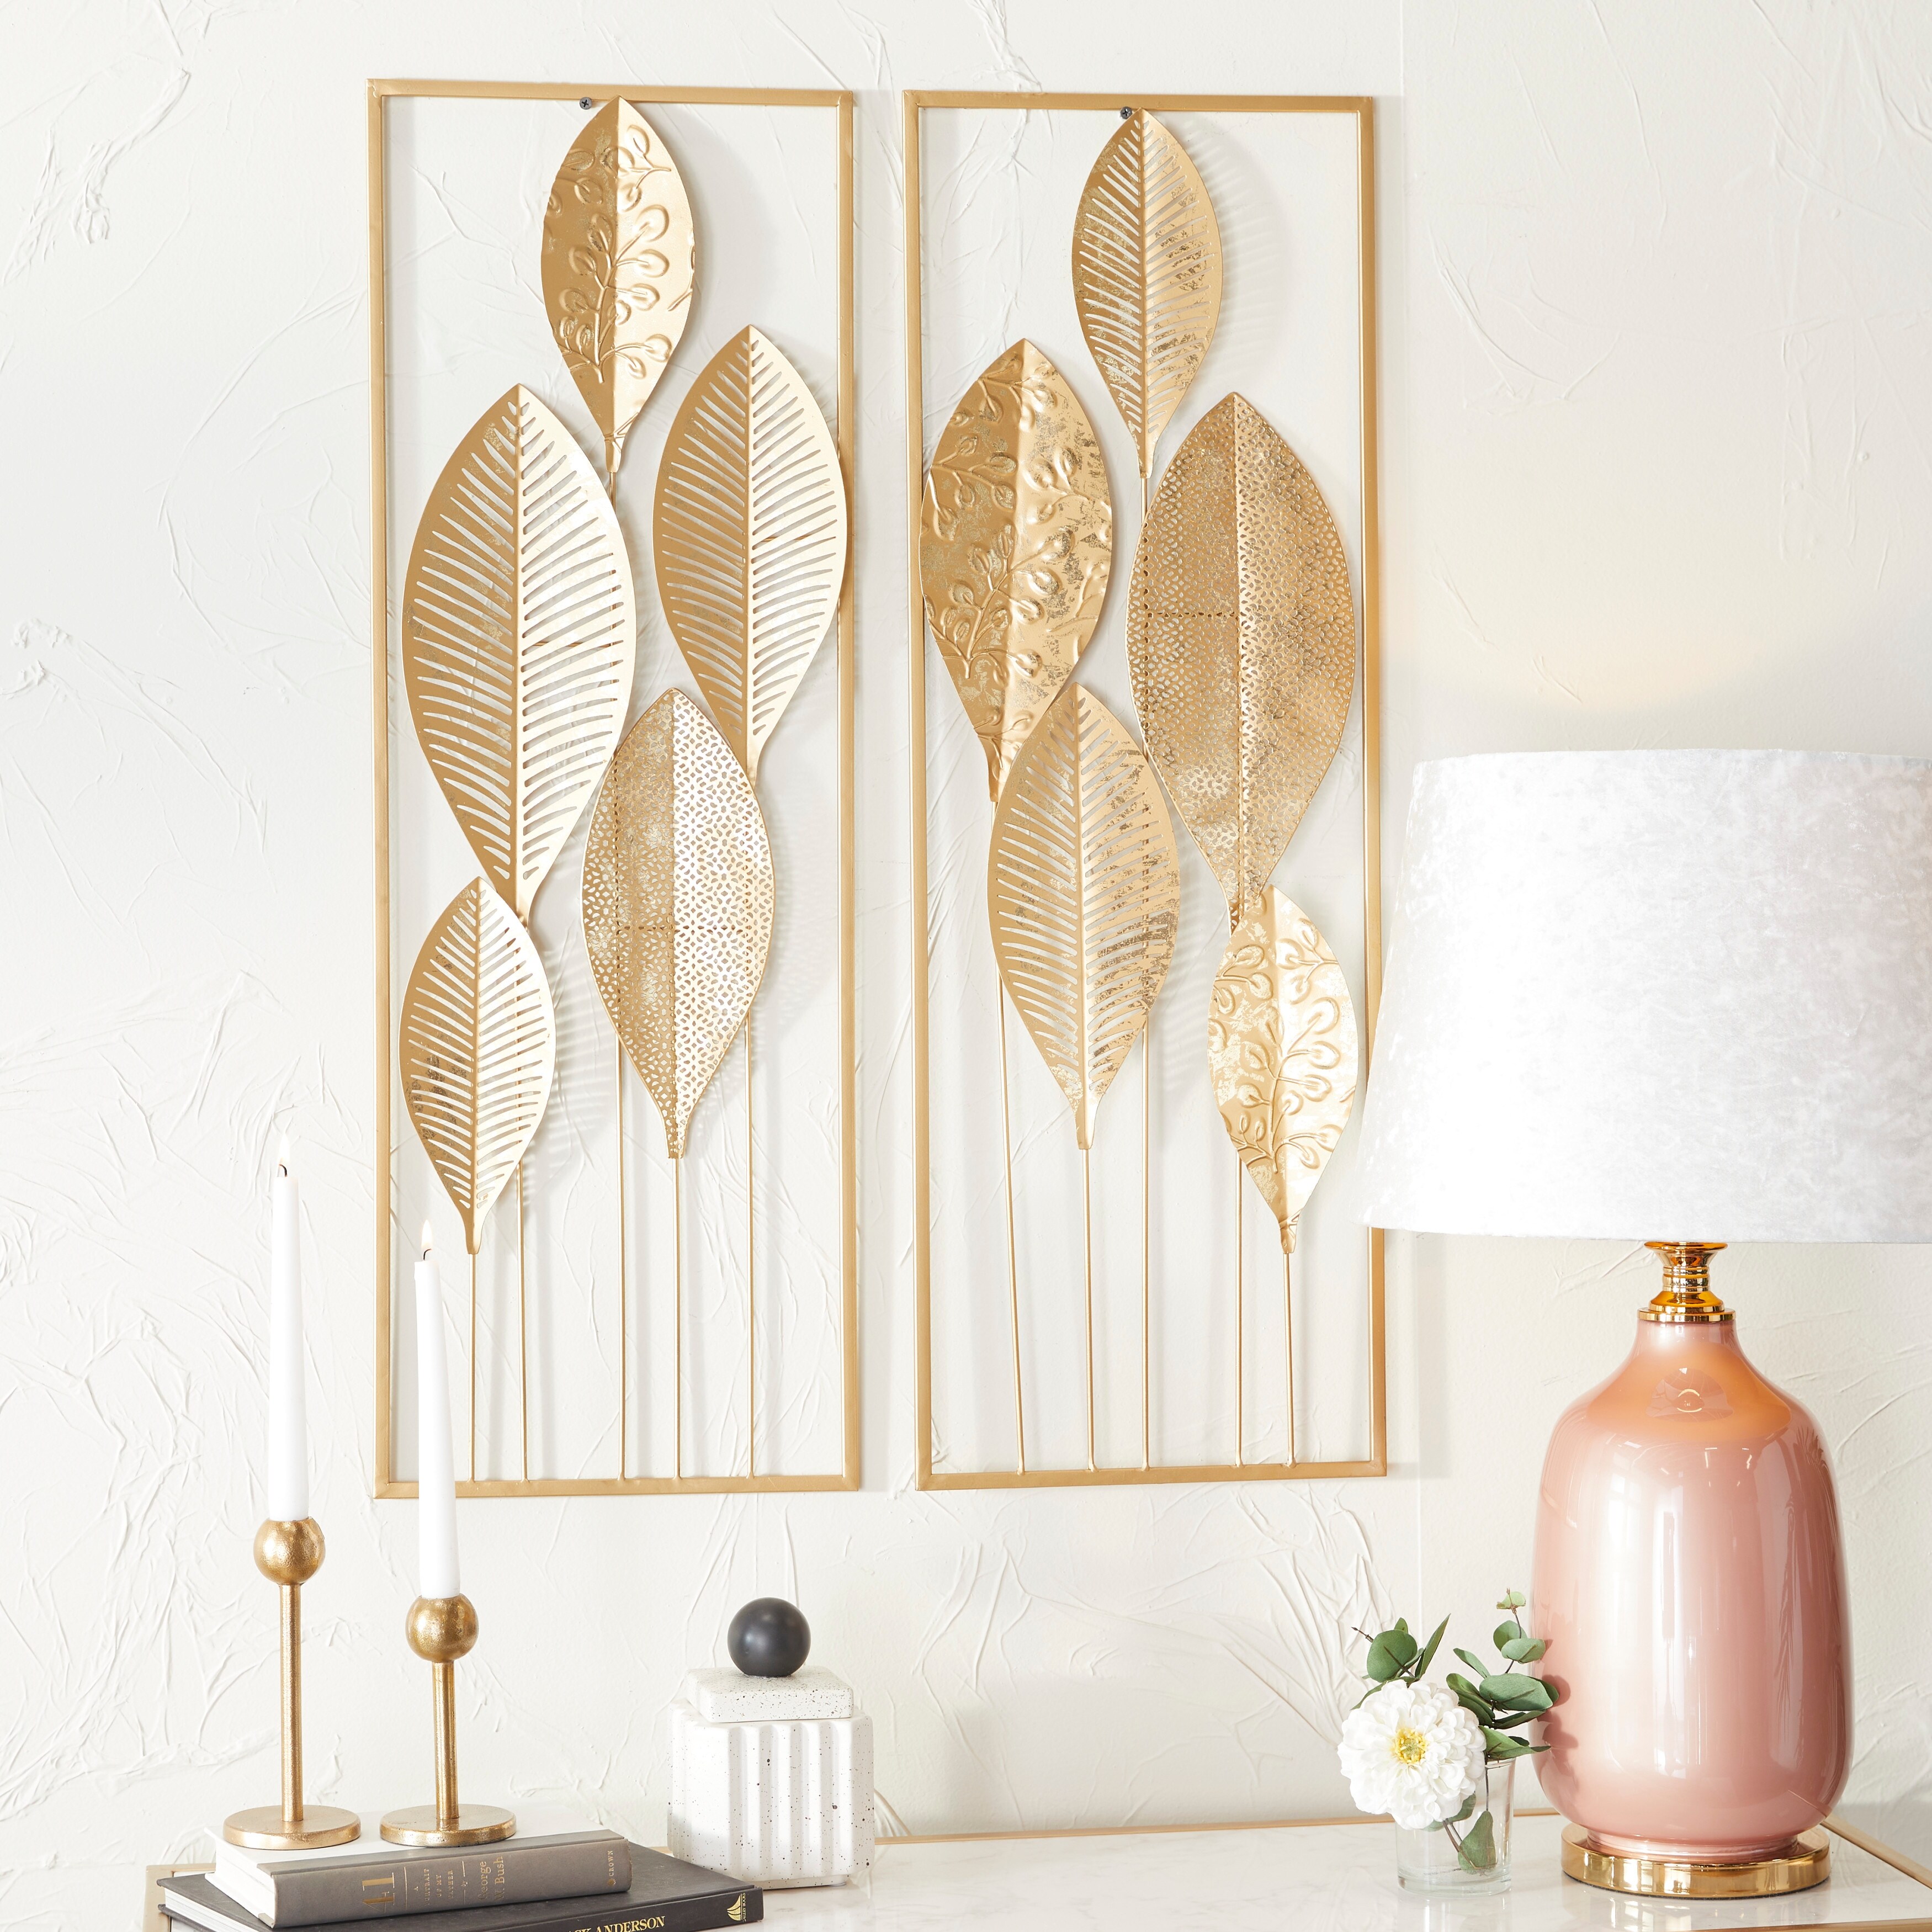 CosmoLiving by Cosmopolitan Gold Metal Tall Cut-Out Leaf Wall Decor with  Gold Frame (Set of 2) On Sale Bed Bath  Beyond 35059836